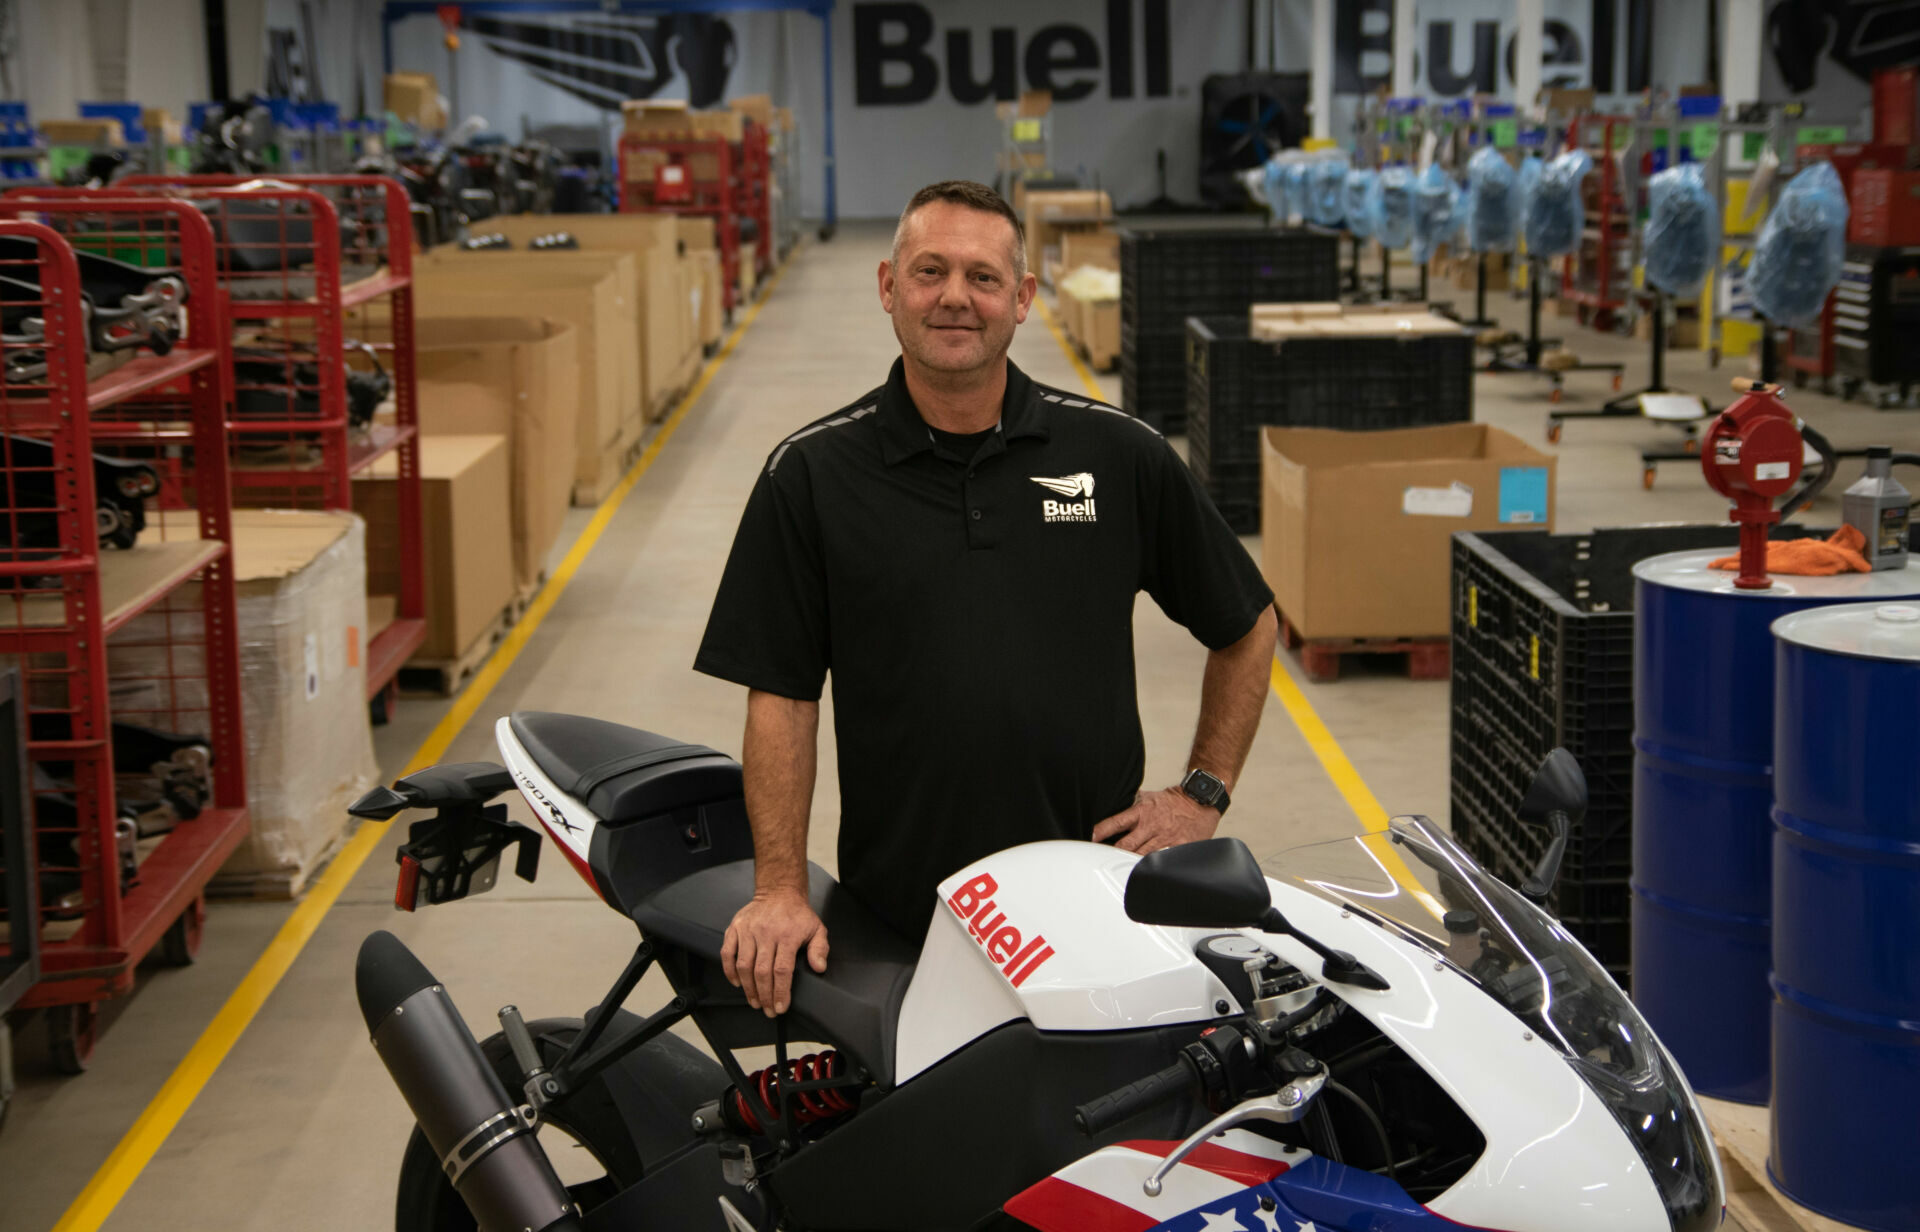 Chris Pobanz, Buell Motorcycles' new Director of Consumer and Service Center Relations. Photo courtesy Buell Motorcycles.